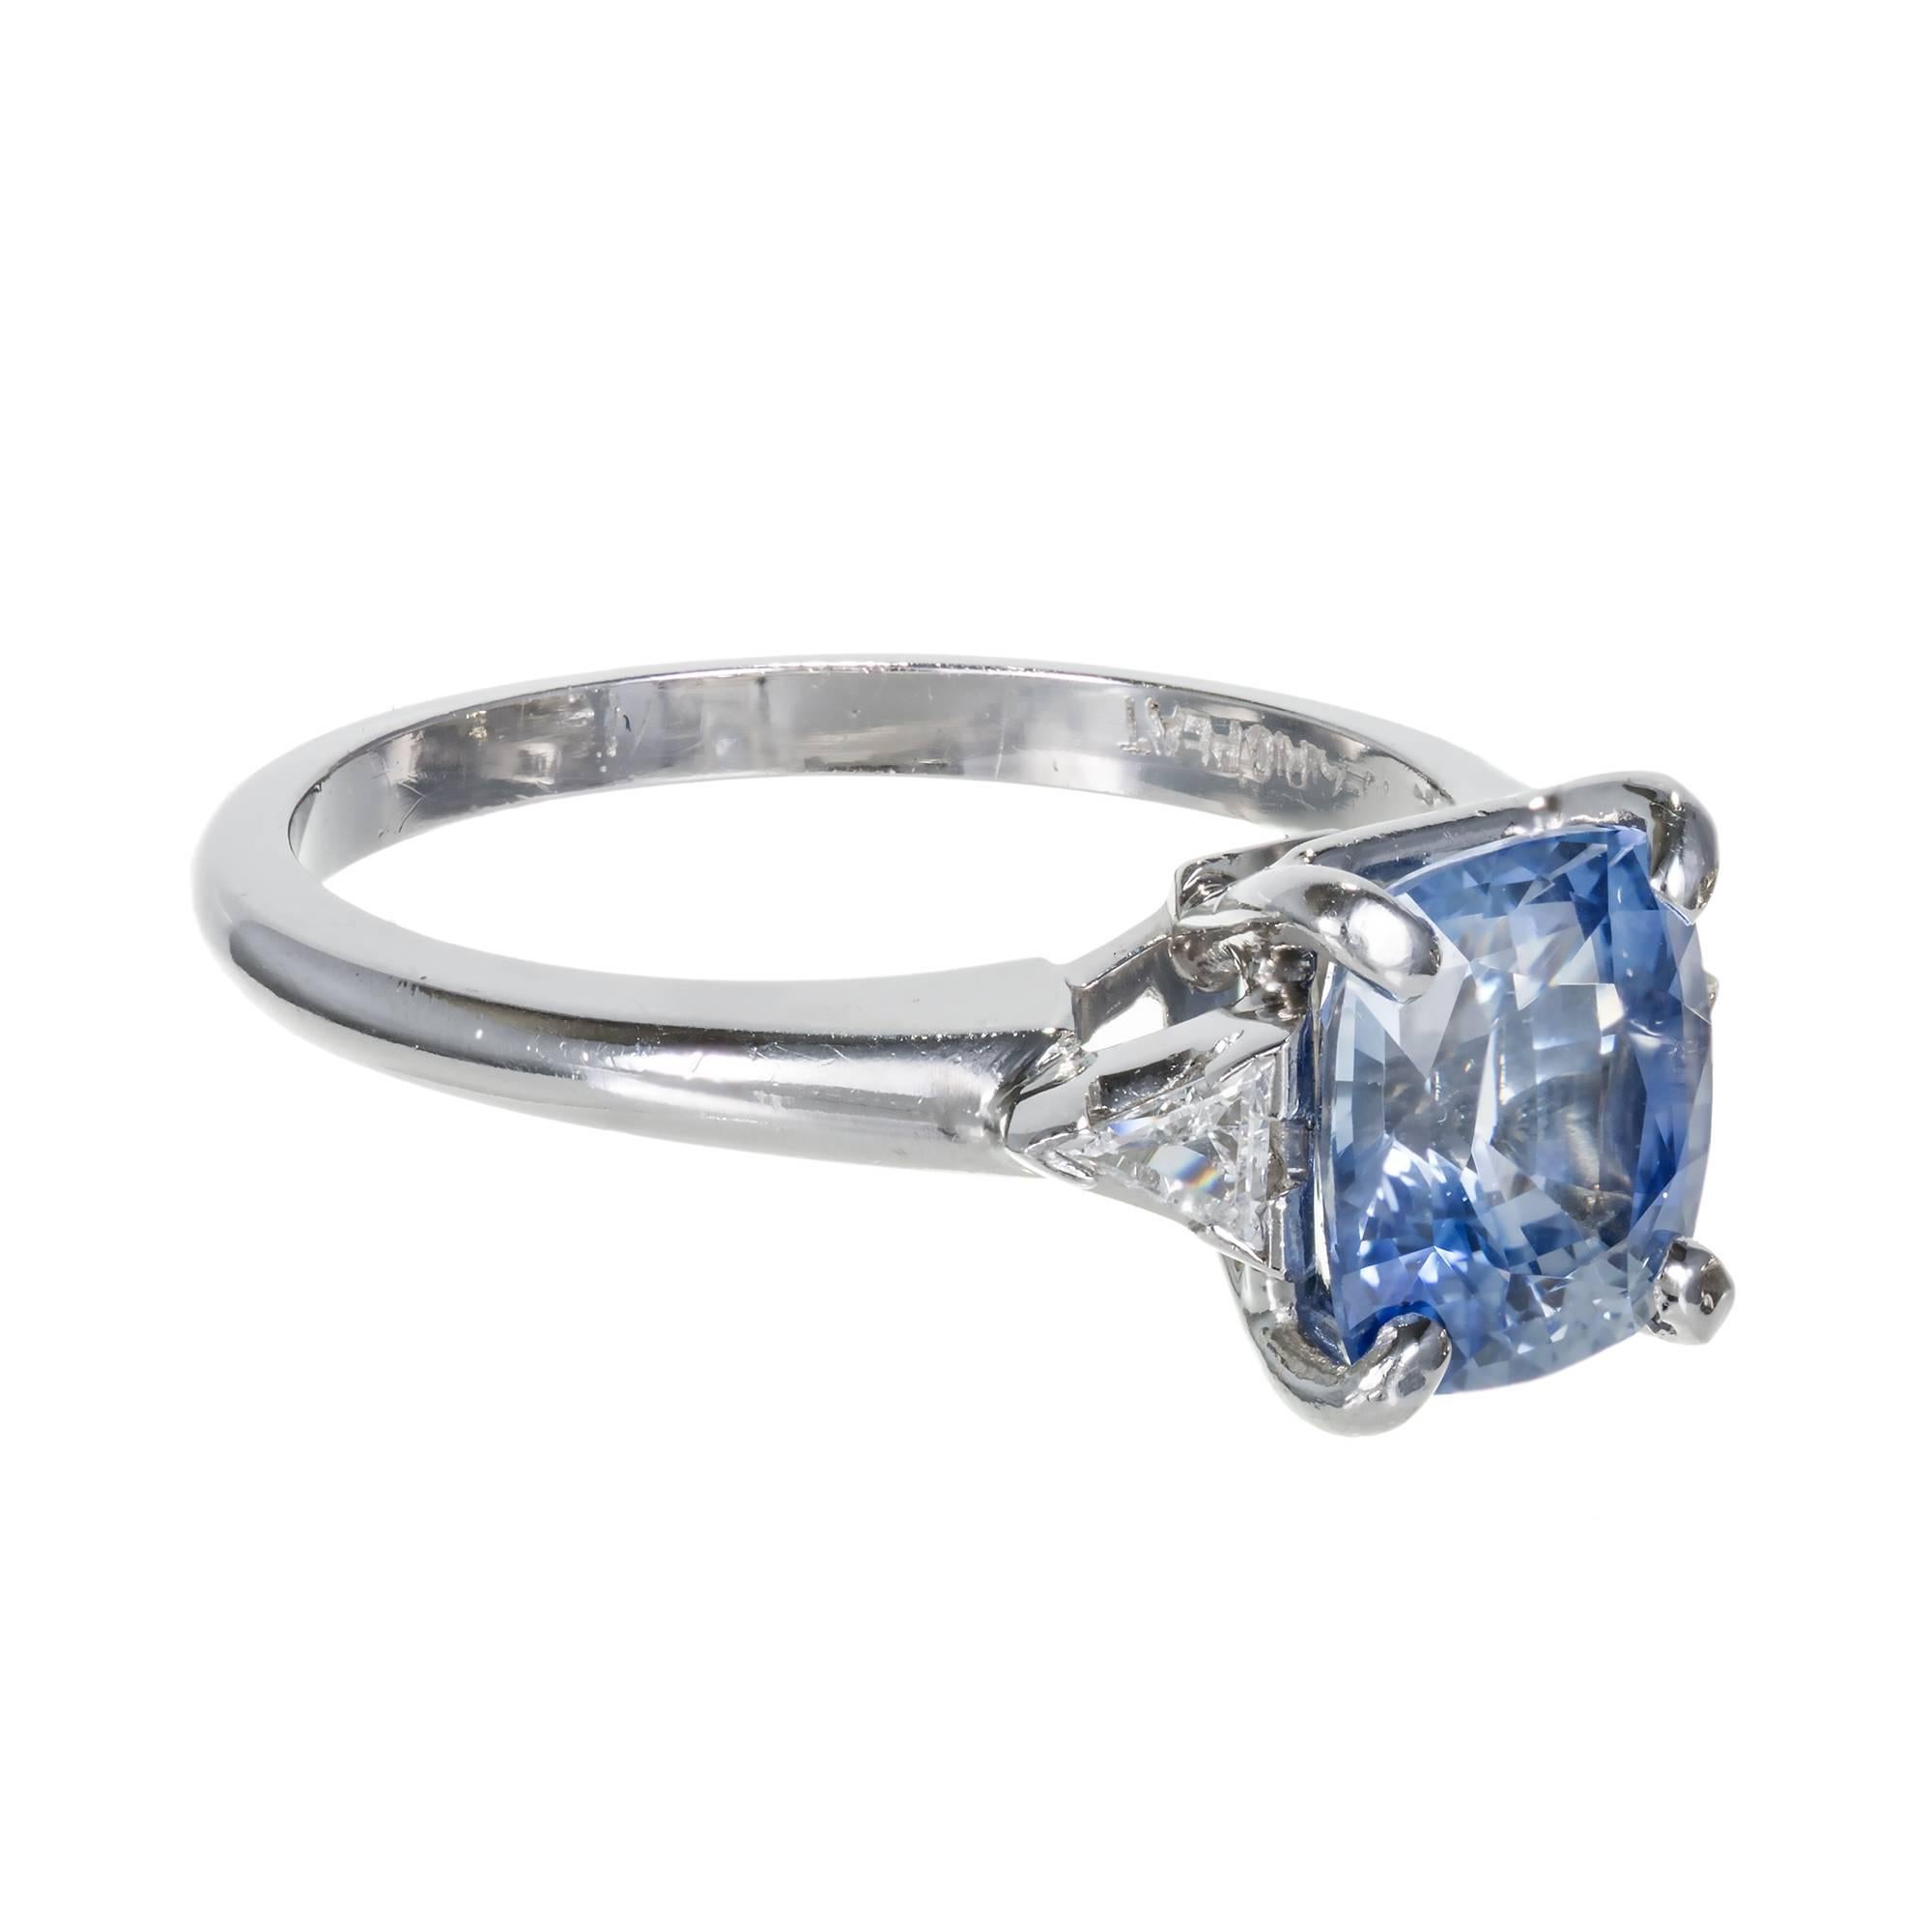 Late Art Deco 1940 cushion cut Sapphire 1.99ct and diamond three stone engagement ring in a platinum setting. GIA certified stone. Simple heat only, no other enhancements.

1 cushion cut Sapphire, approx. total weight 1.99cts, VS, 7.66 x 6.58 x